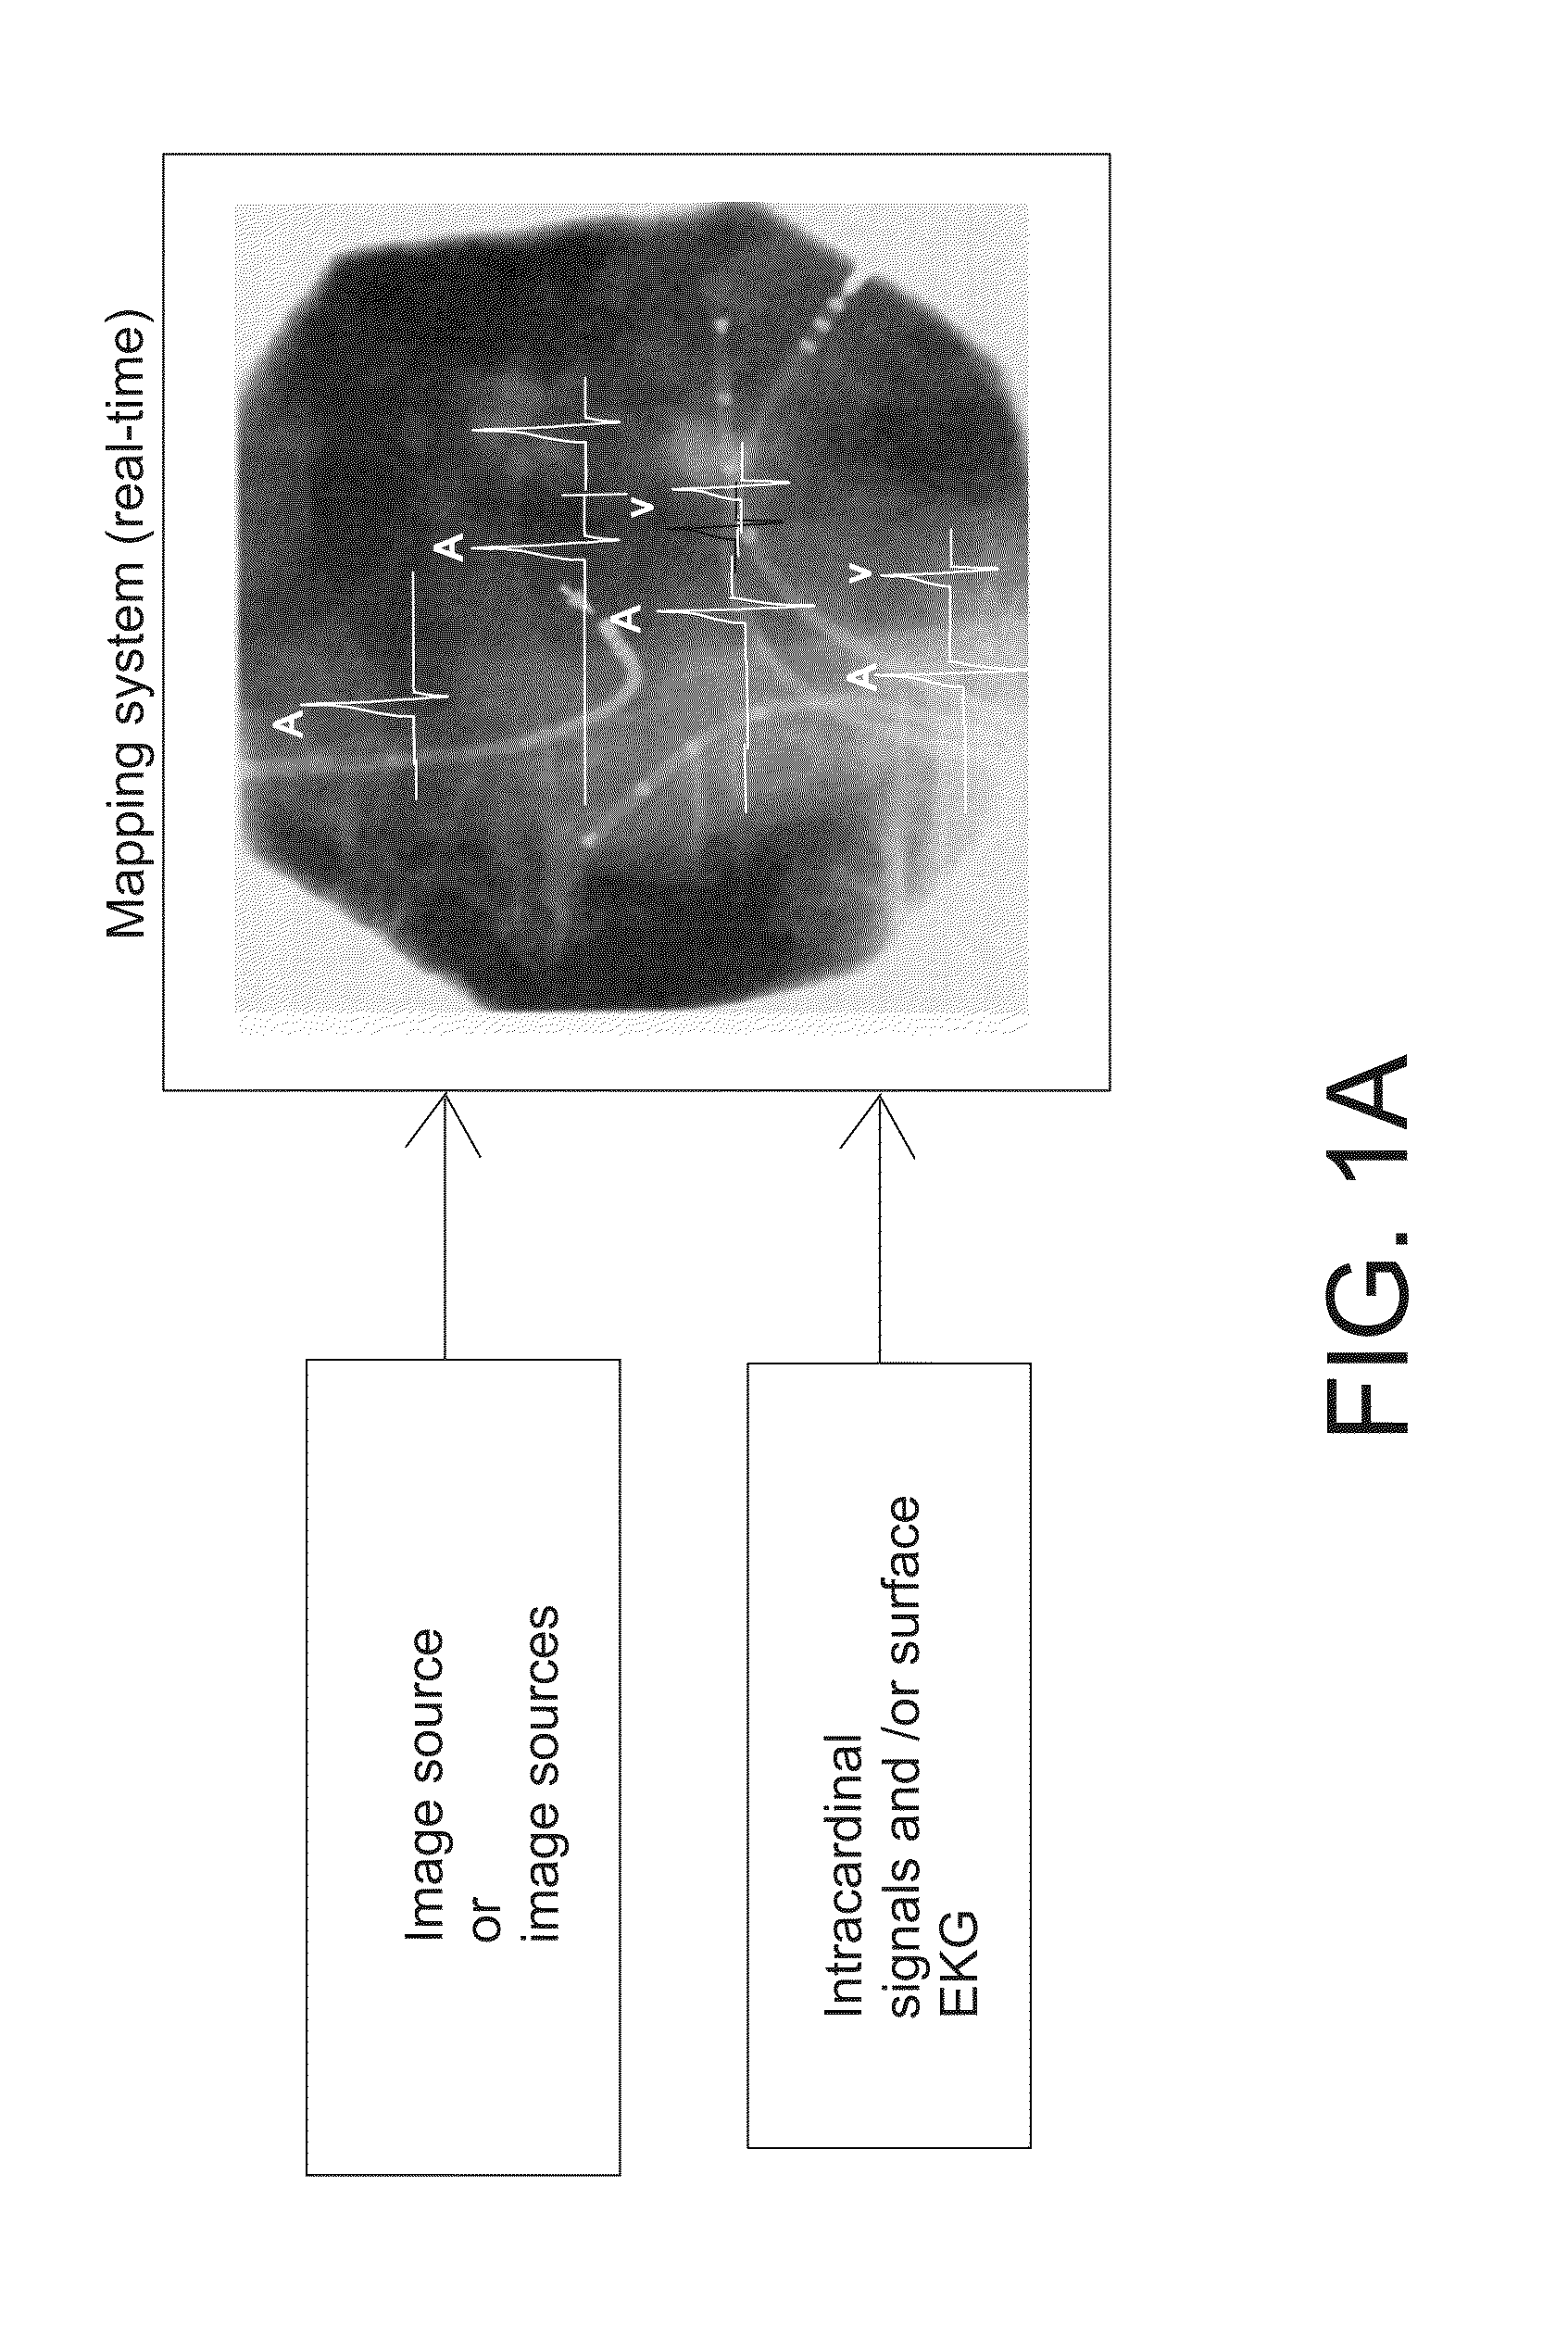 Methods and system for real-time cardiac mapping